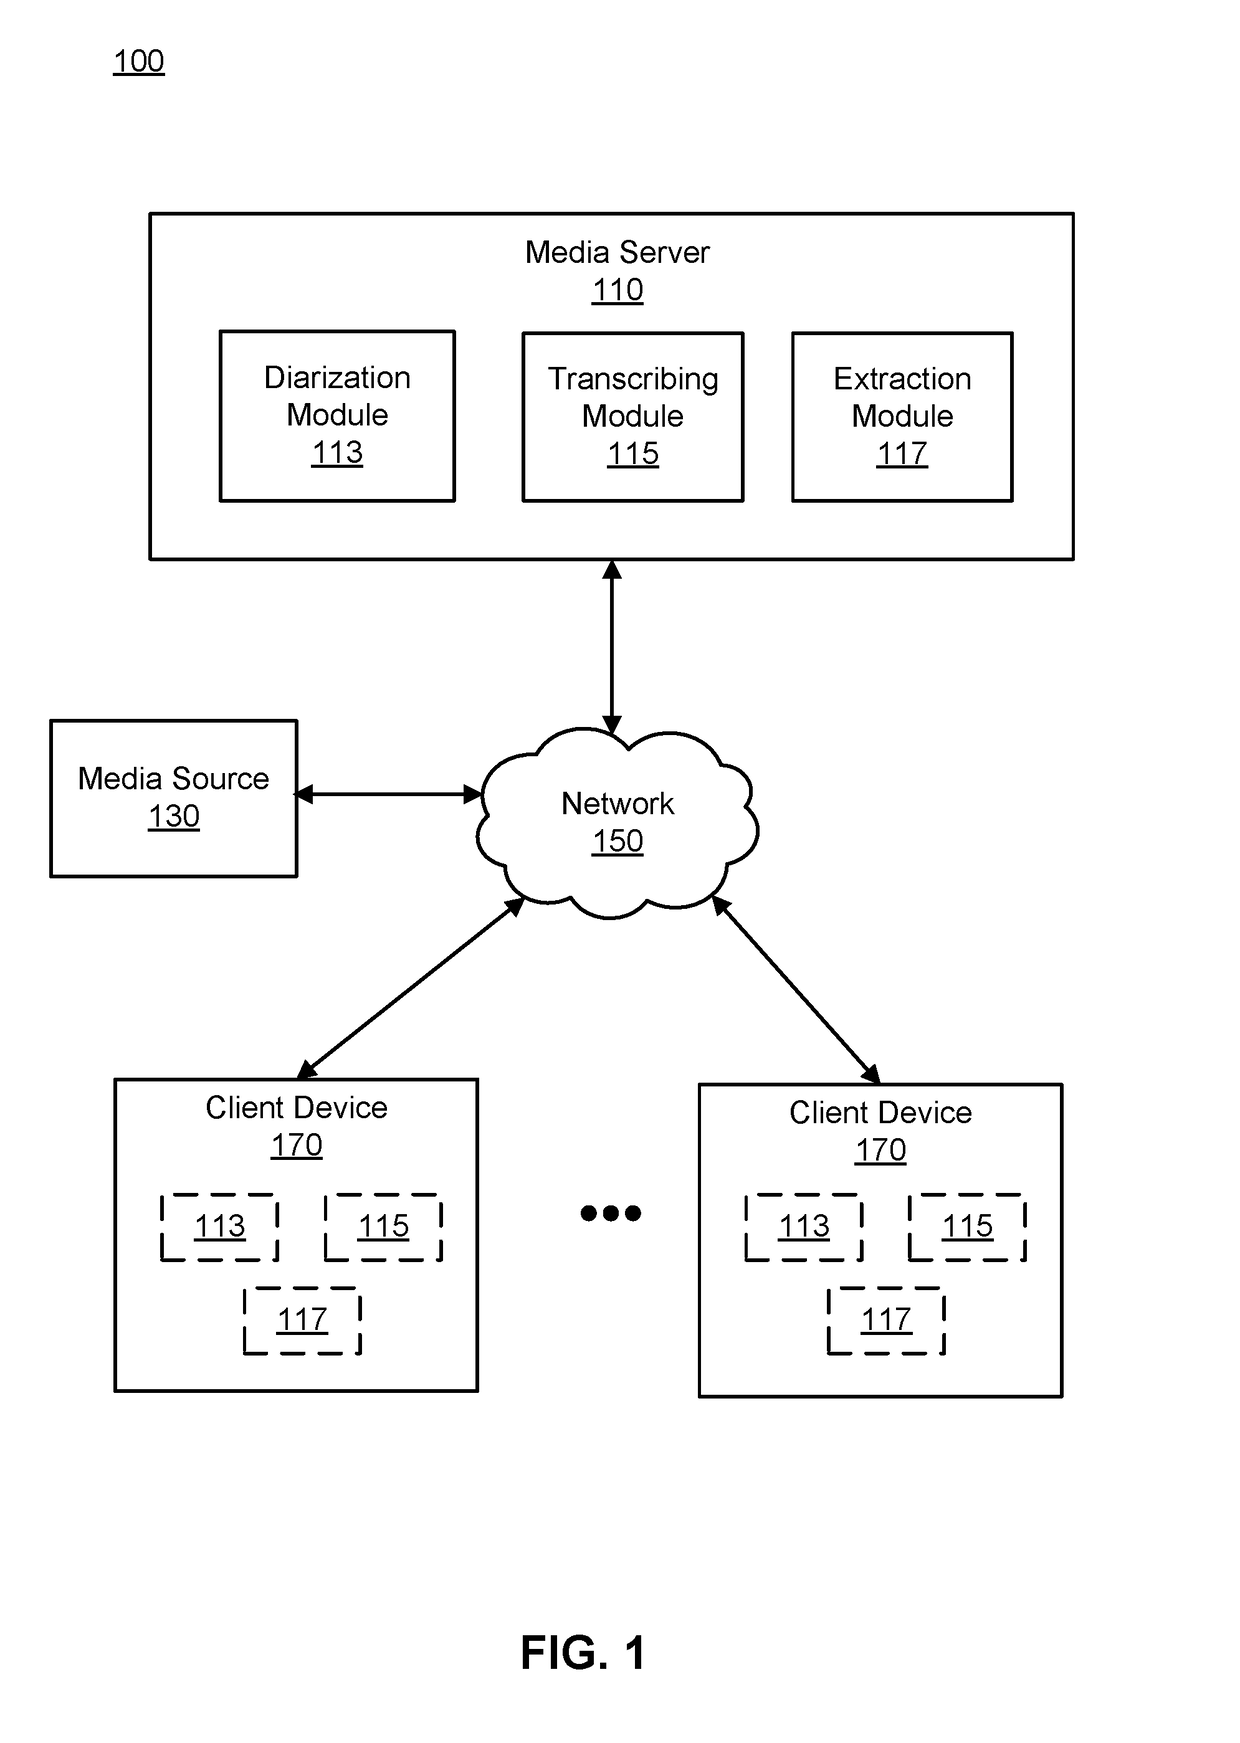 System and method for diarization of speech, automated generation of transcripts, and automatic information extraction